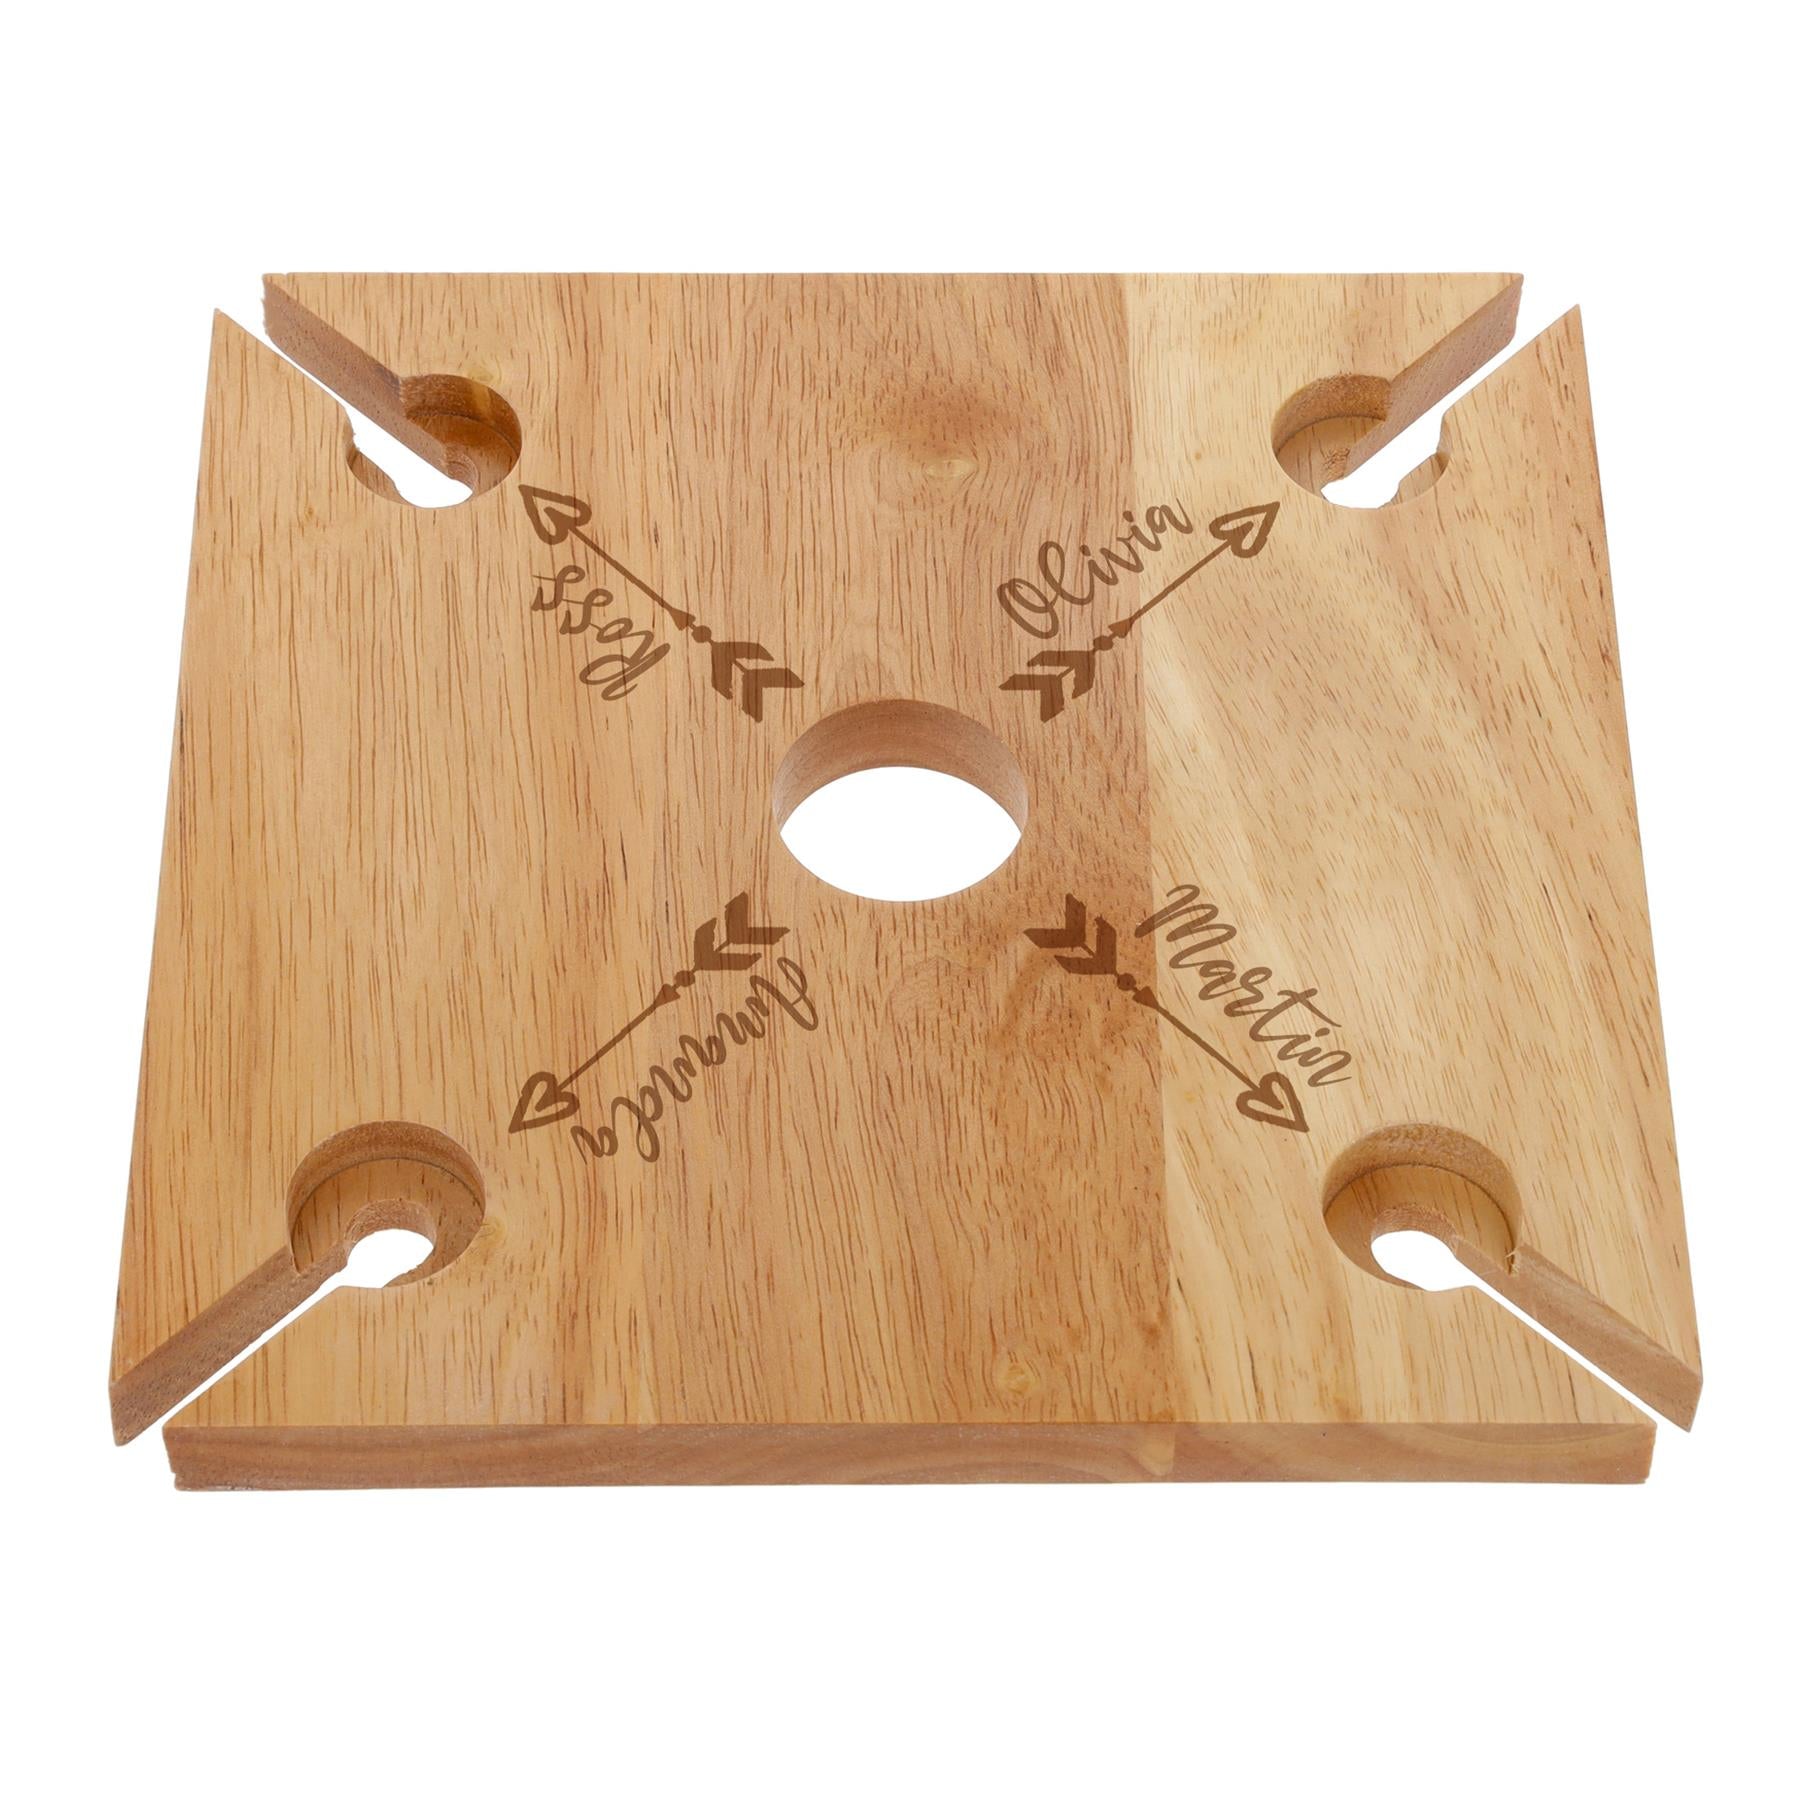 Engraved Personalised Wooden 4 Wine Glass Butler Caddy With Names  - Always Looking Good - Name Arrow Design - Empty  